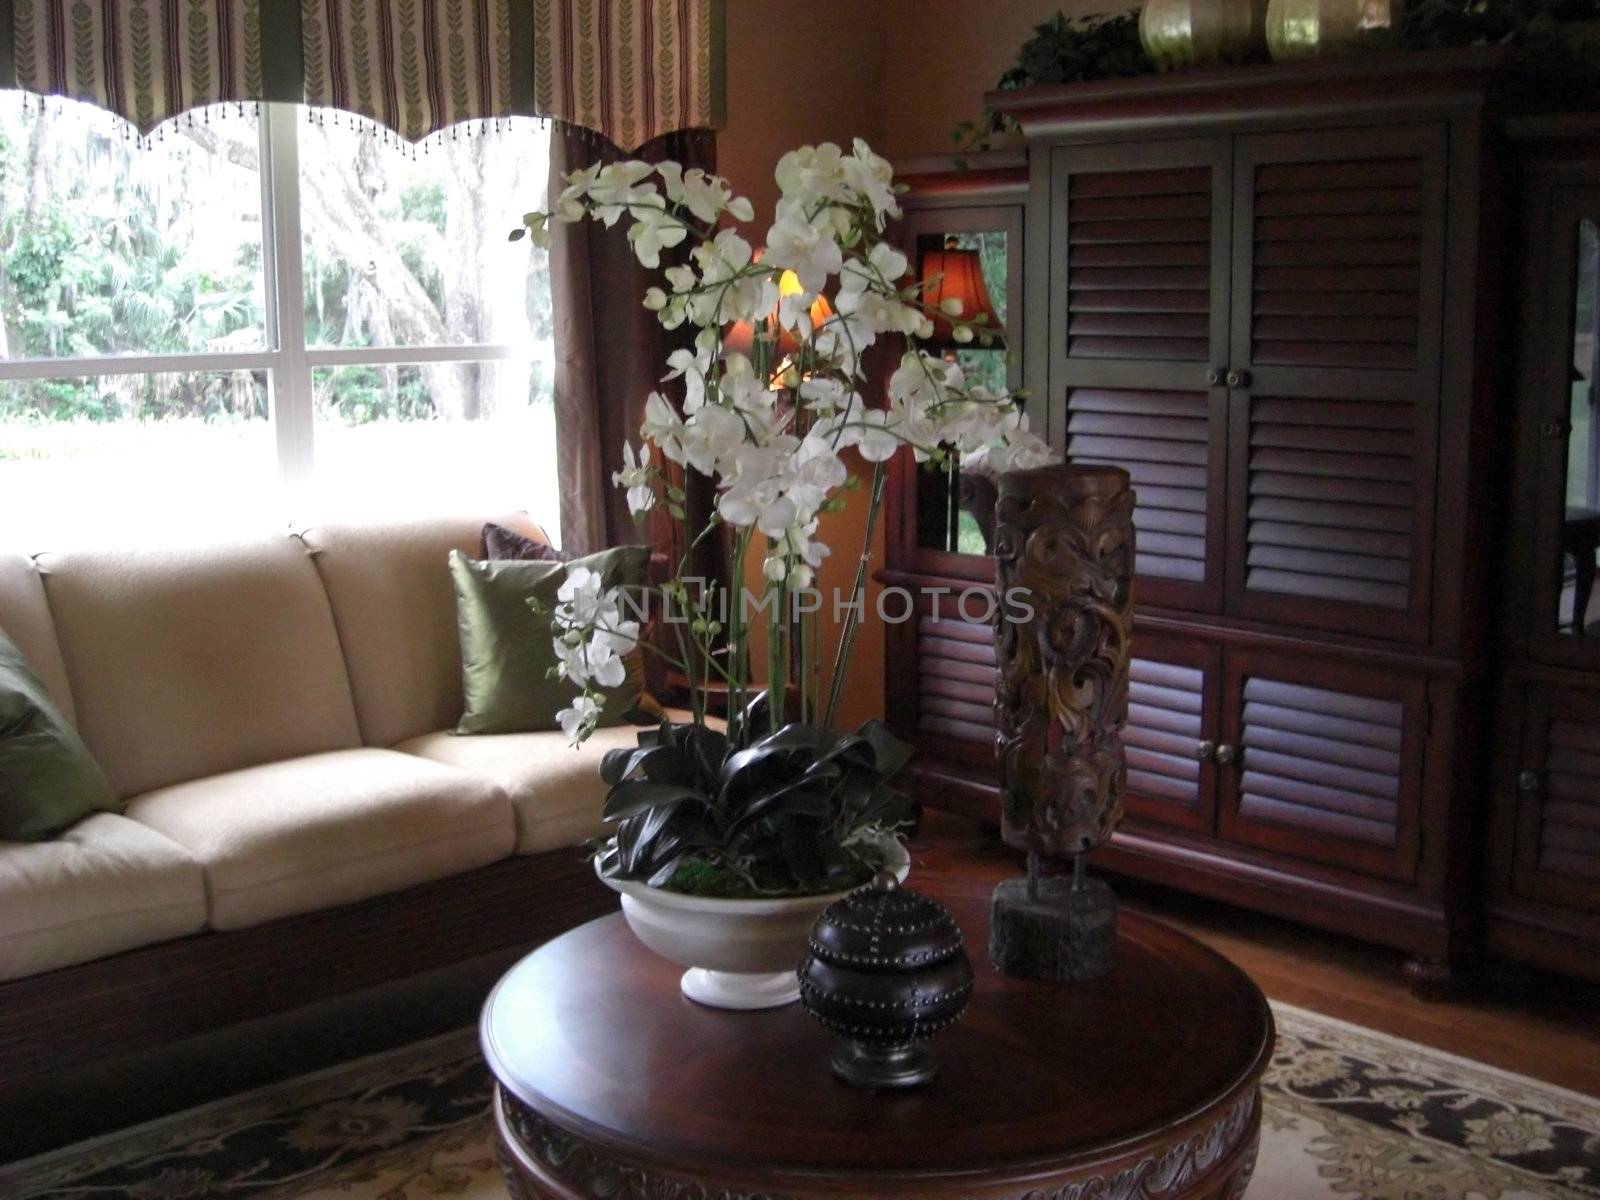 A room with elegant pieces of furniture and a big center piece on a matching coffee table.